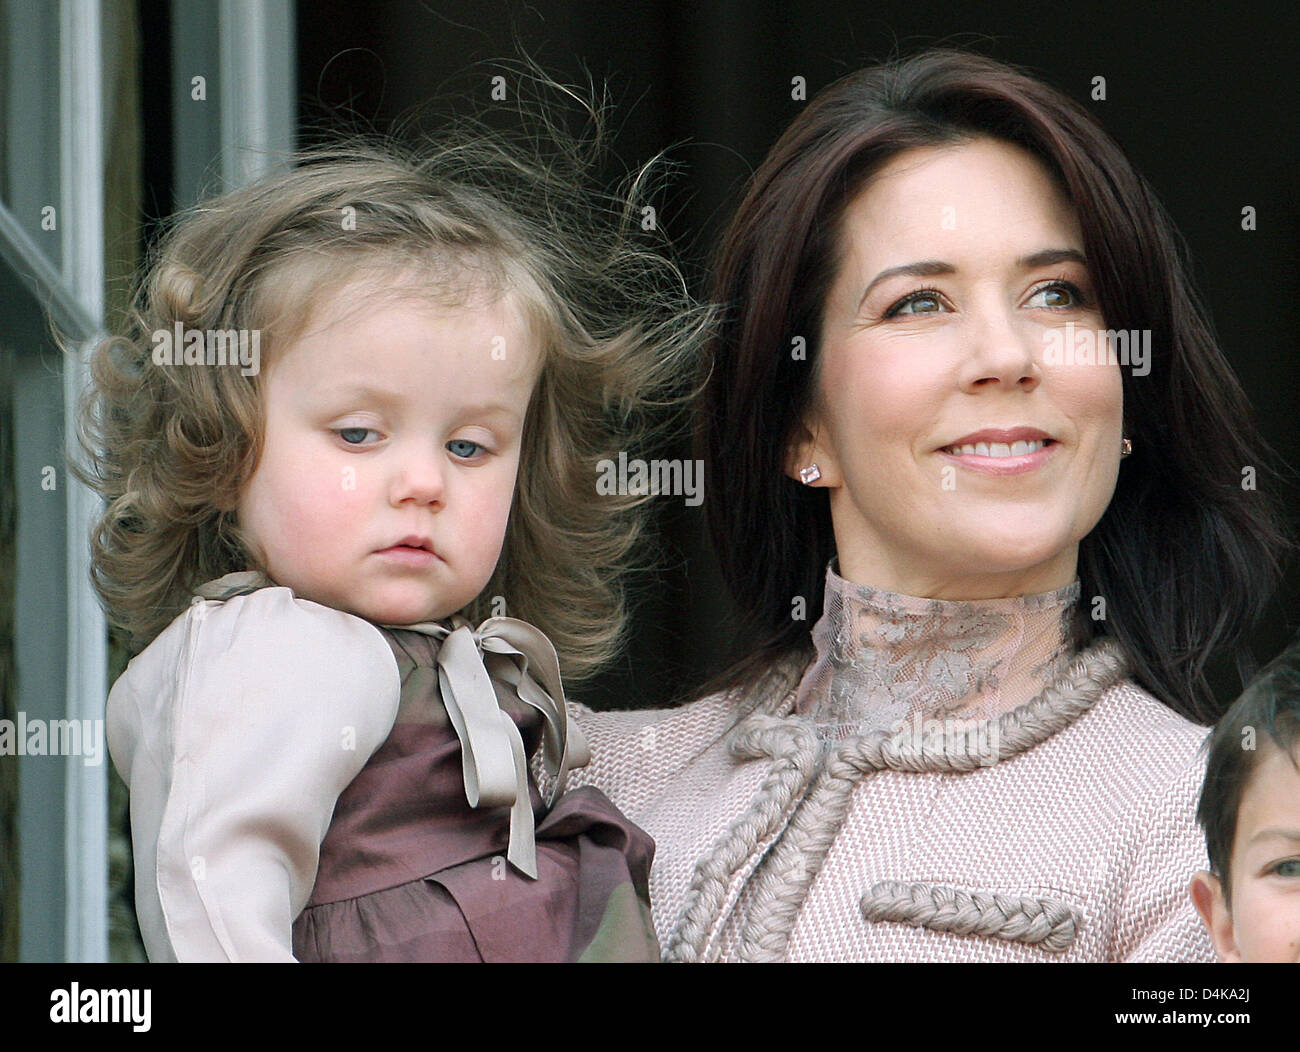 Princess Mary of Denmark (R) and her daughter Princess Isabella of Denmark attend the celebration of the 69th birthday of Queen Margrethe II of Denmark on the balcony of Amalienborg Palace in Copenhagen, Denmark, 16 April 2009. Photo: Patrick van Katwijk Stock Photo